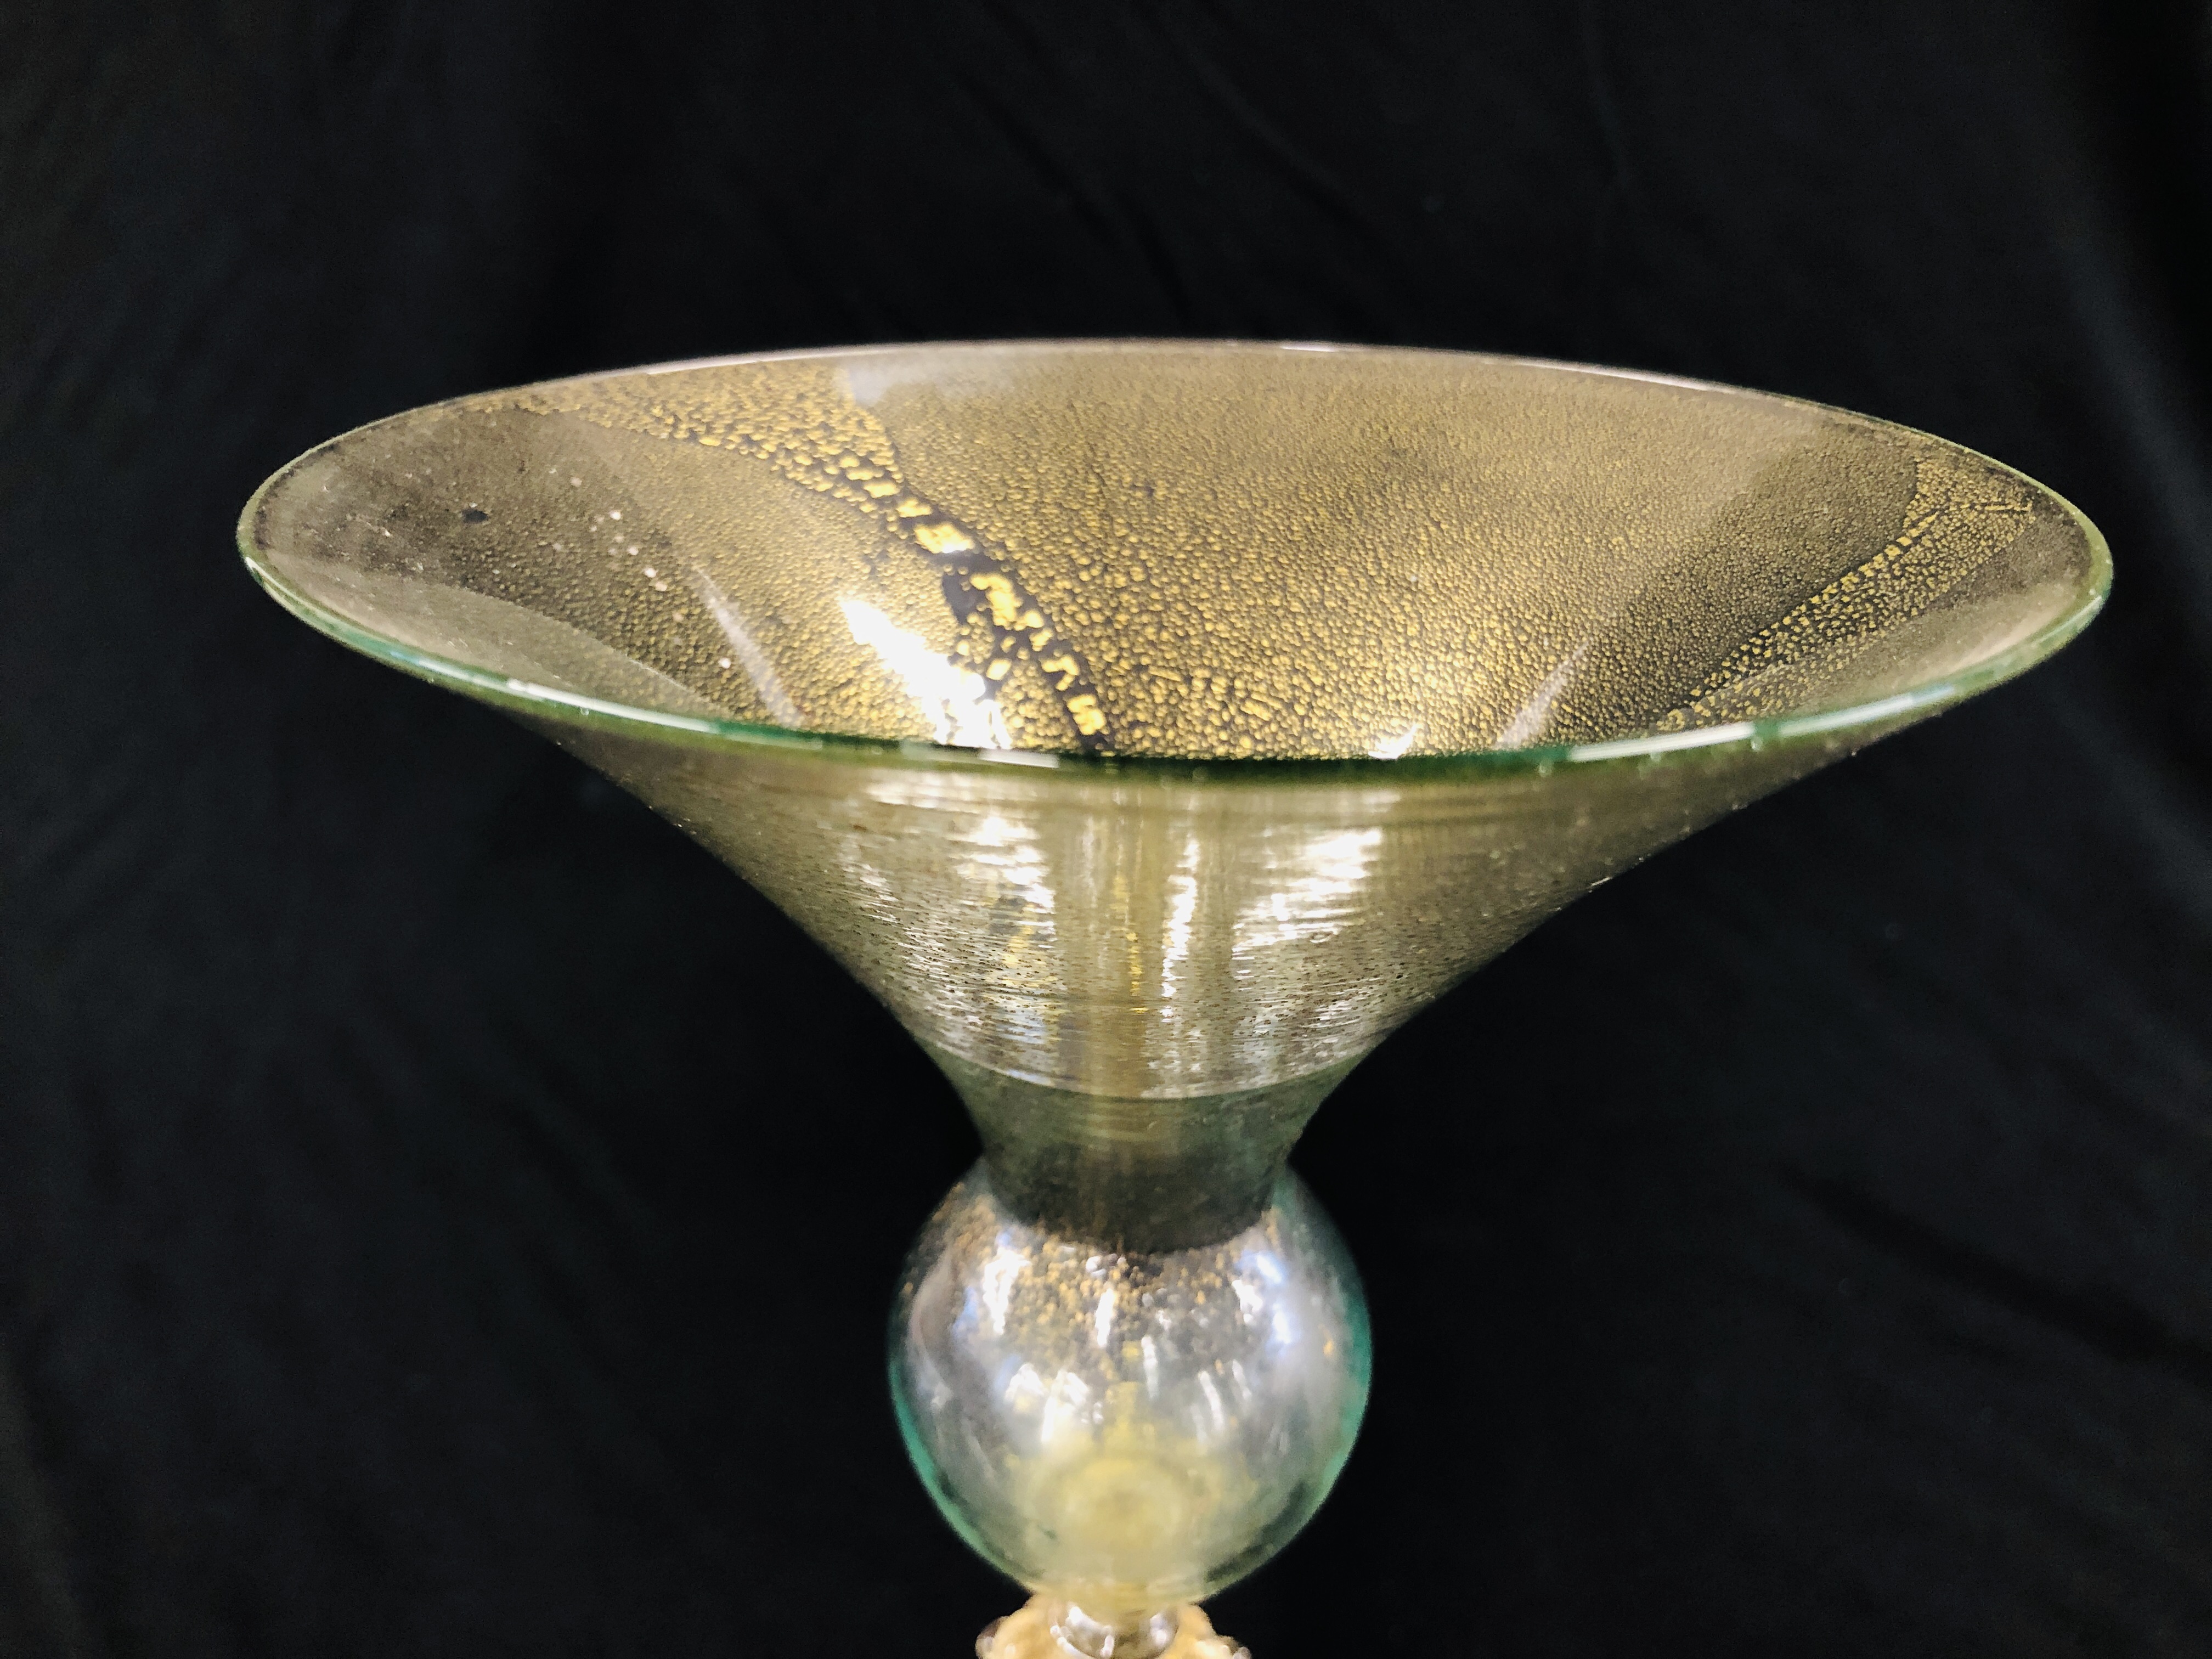 A VENETIAN GLASS WITH CONICAL BOWL, THE STEM WITH WHITE METAL COLLAR, 25.5CM HIGH. - Image 8 of 12